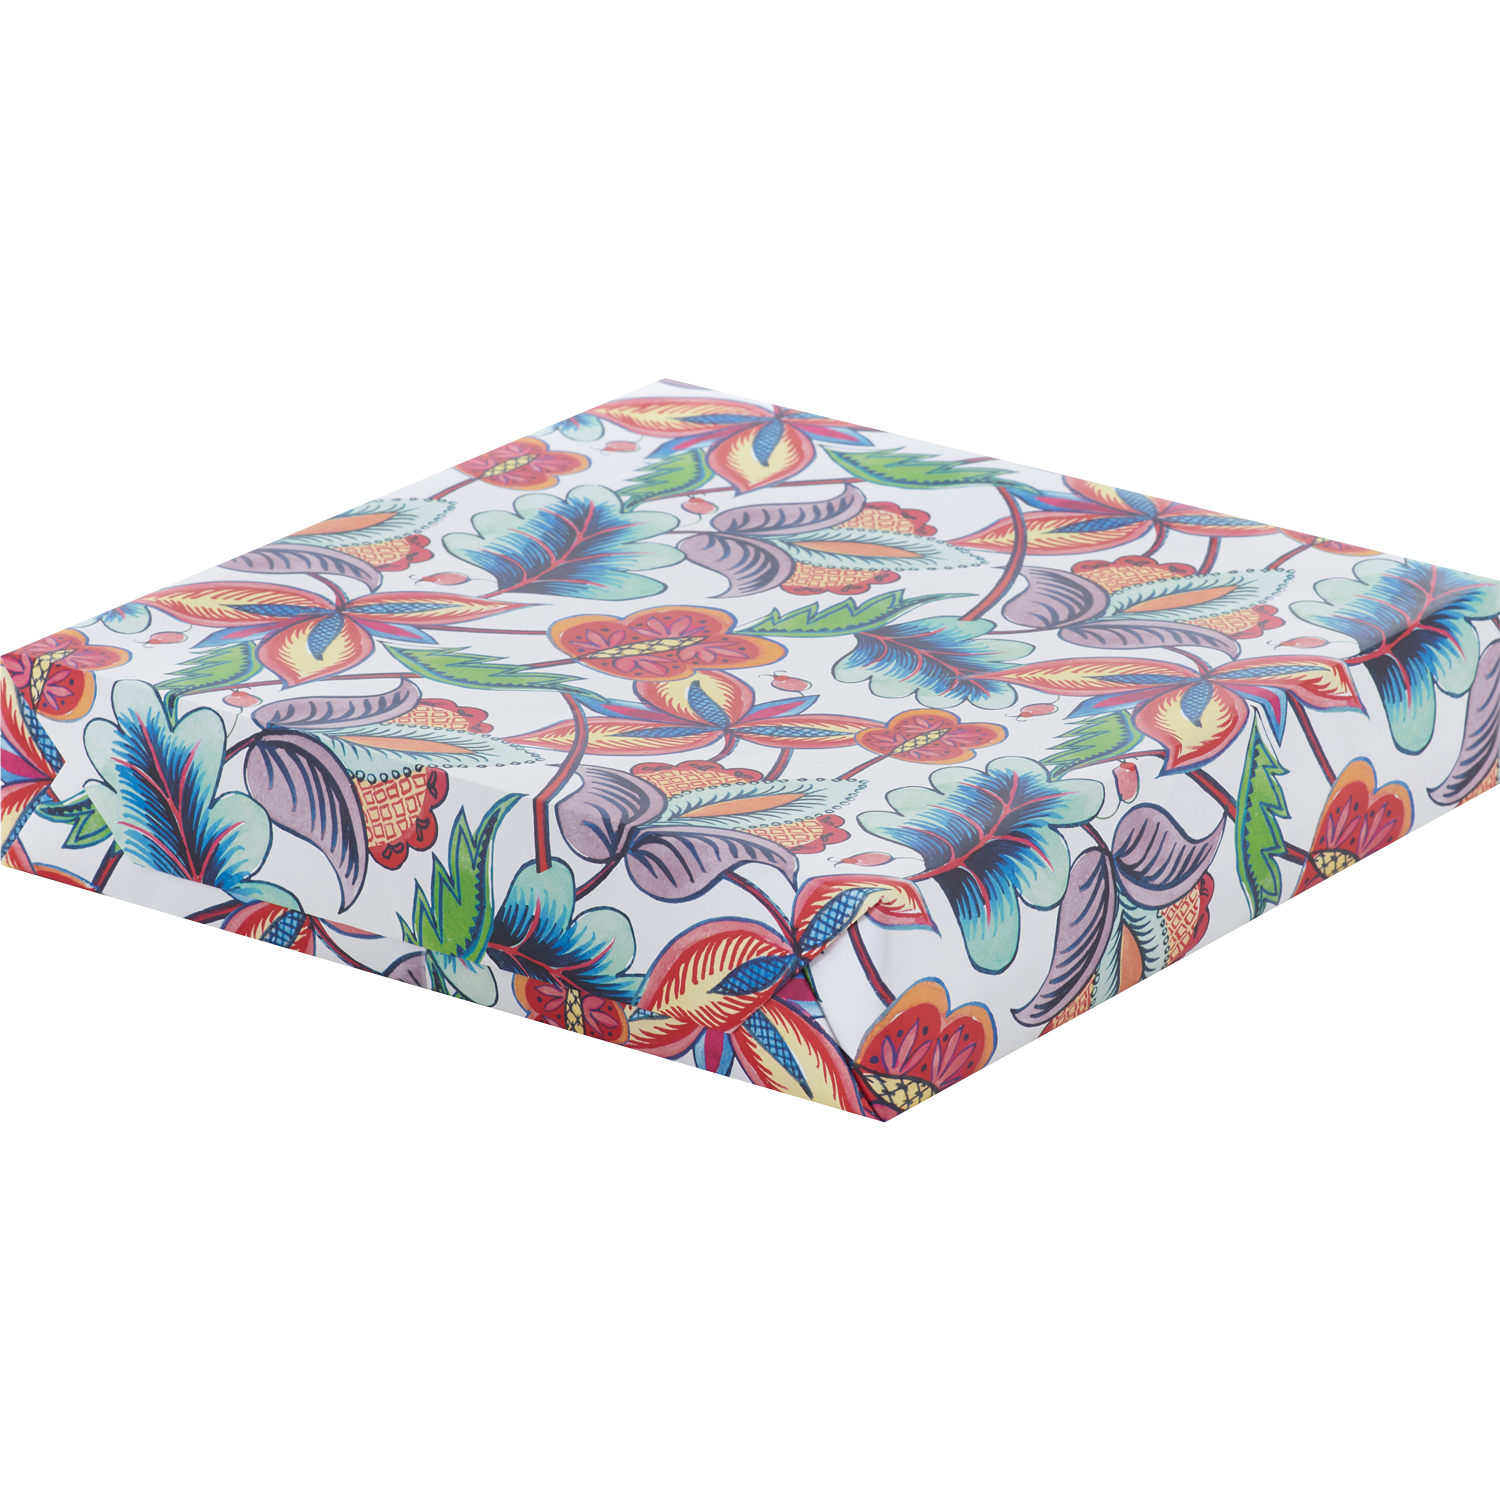 Exotic Vines - Wrapping Paper    